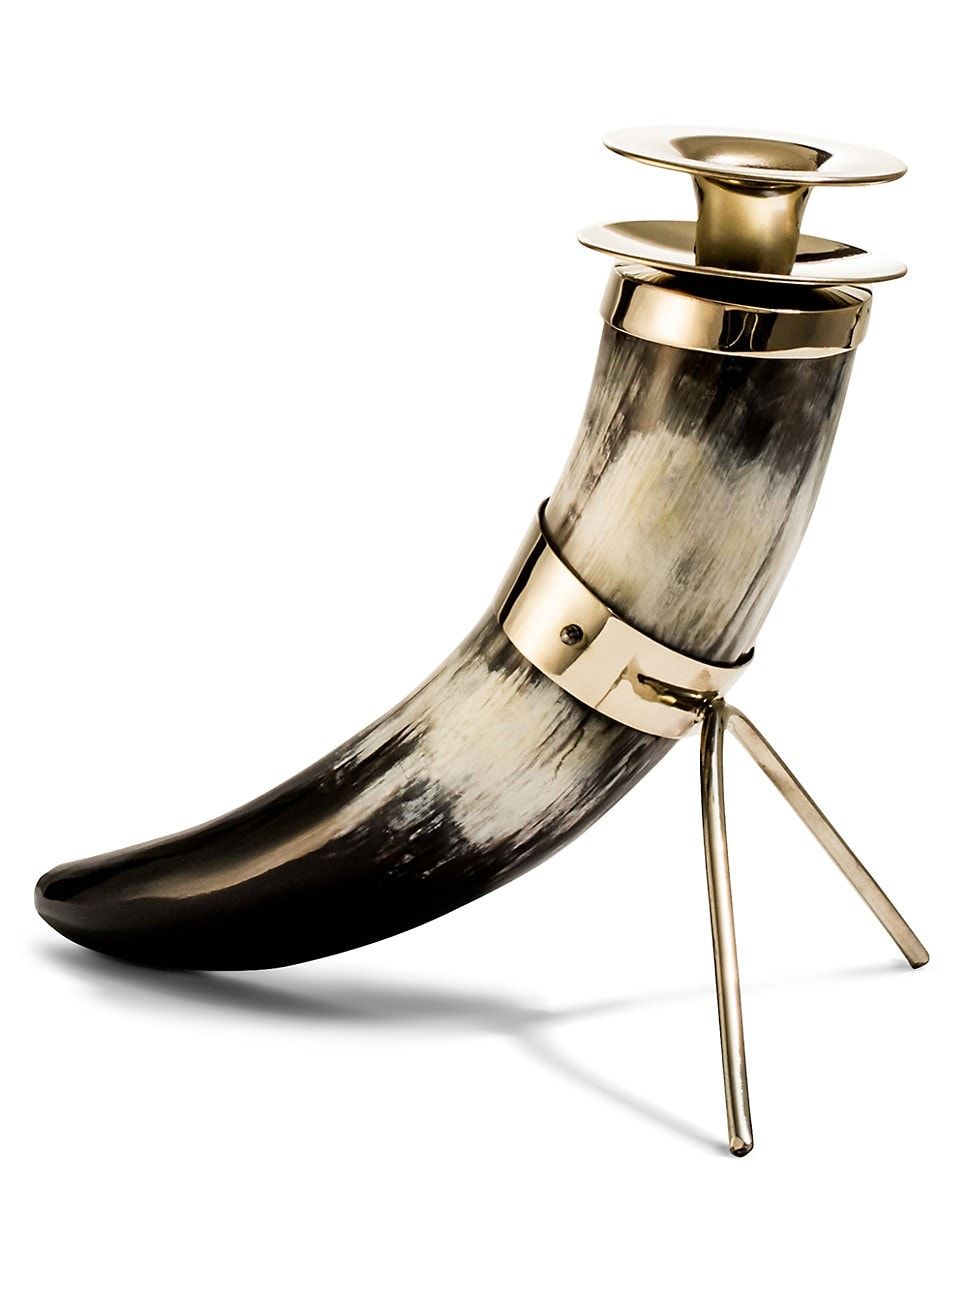 Solitaire Horn Candleholder | Saks Fifth Avenue